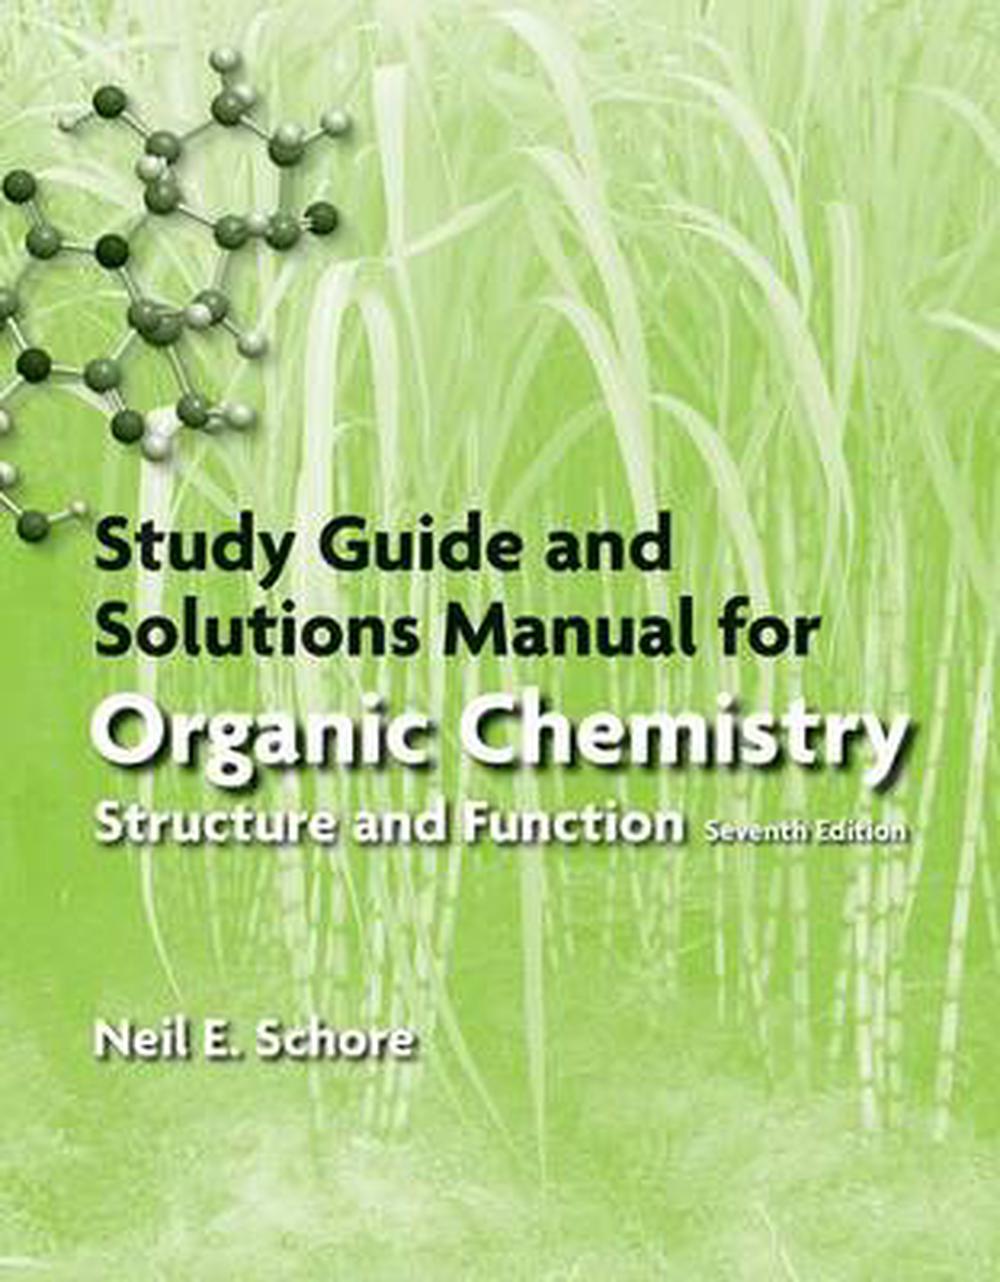 Study Guide/Solutions Manual for Organic Chemistry by Peter Vollhardt (English) eBay